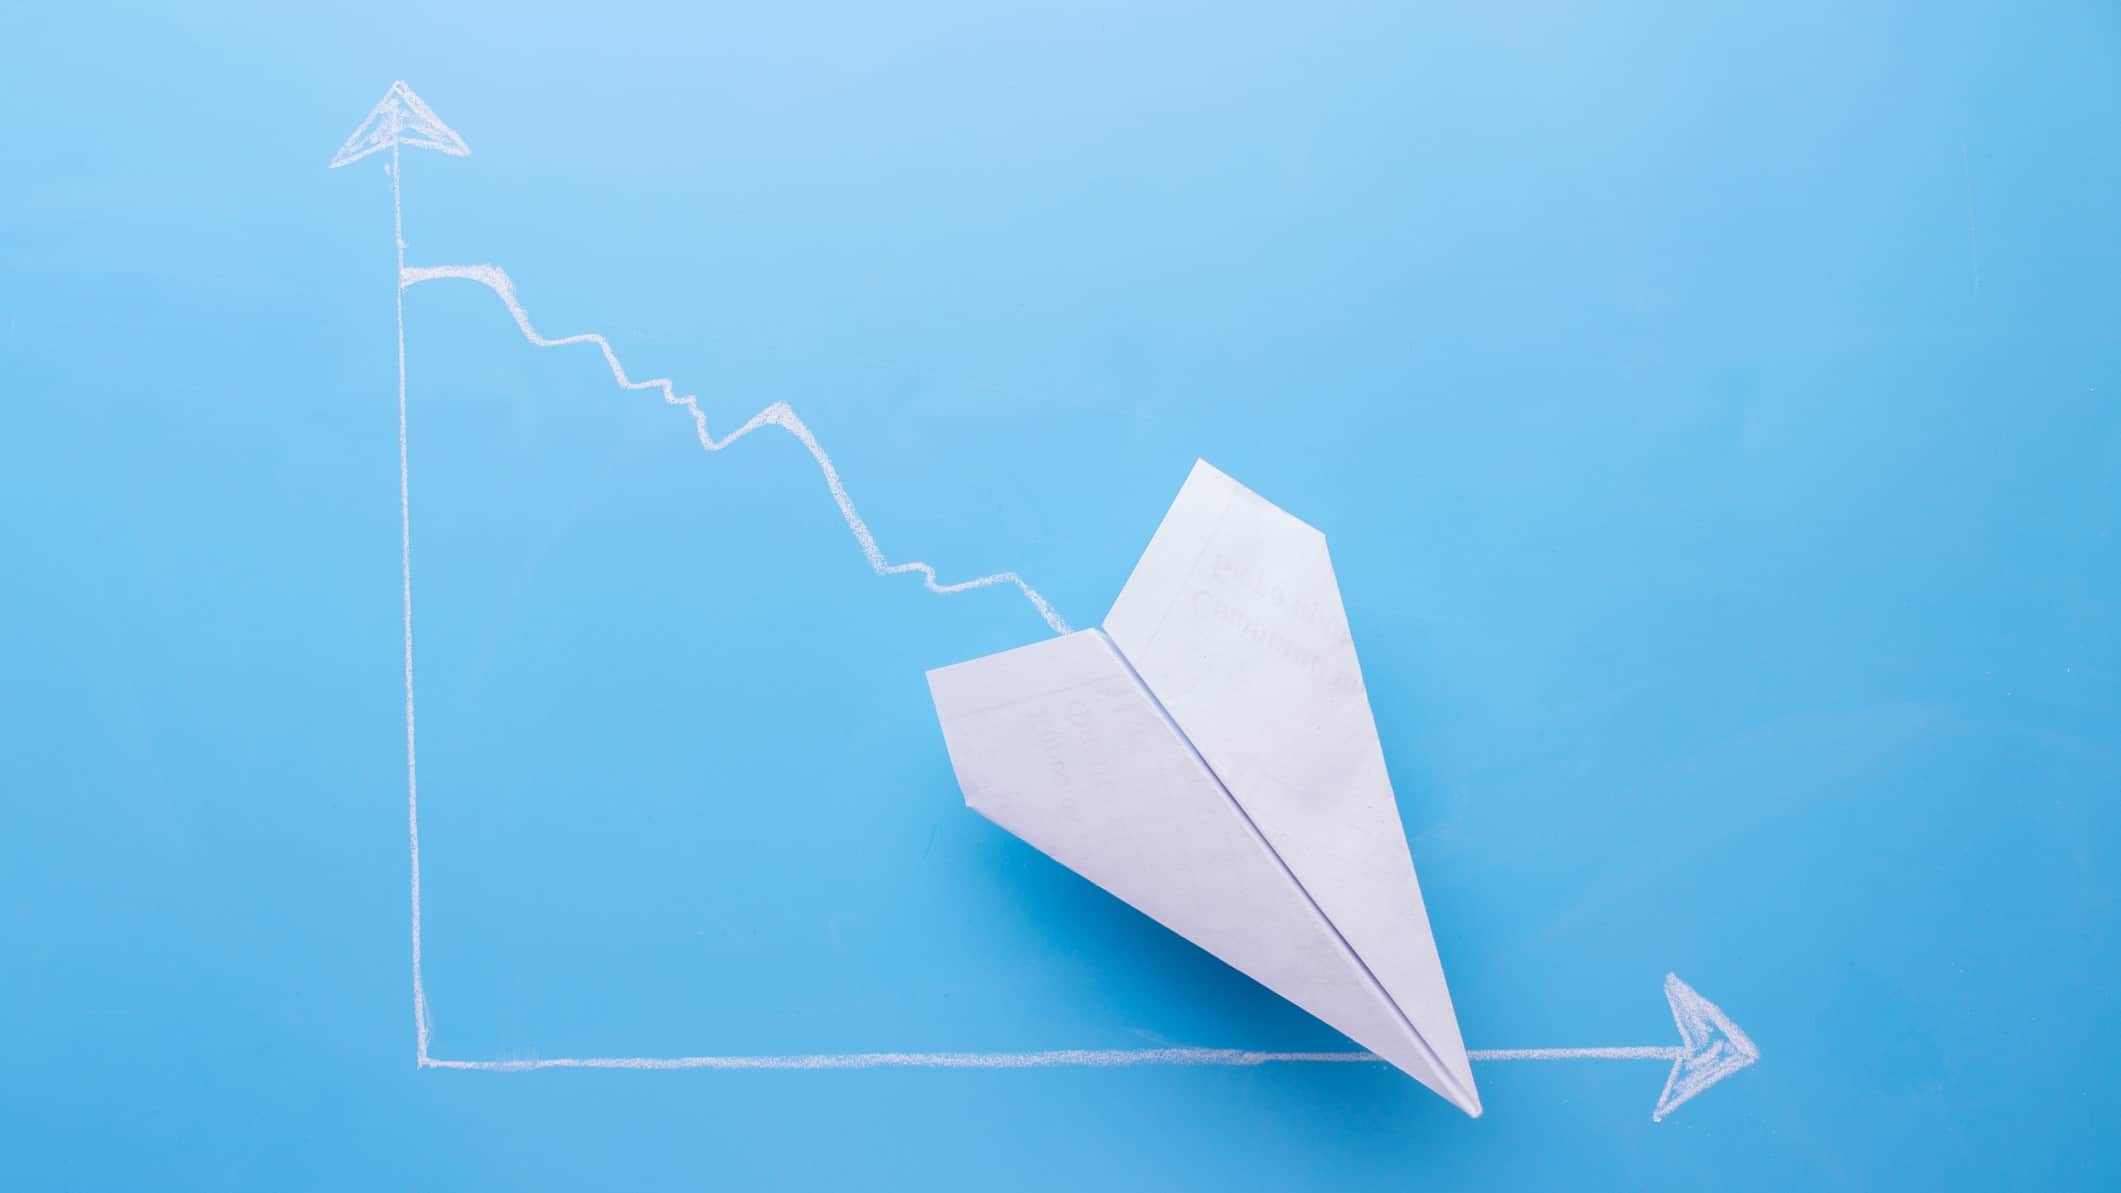 Paper aeroplane going down on a chart, symbolising a falling share price.